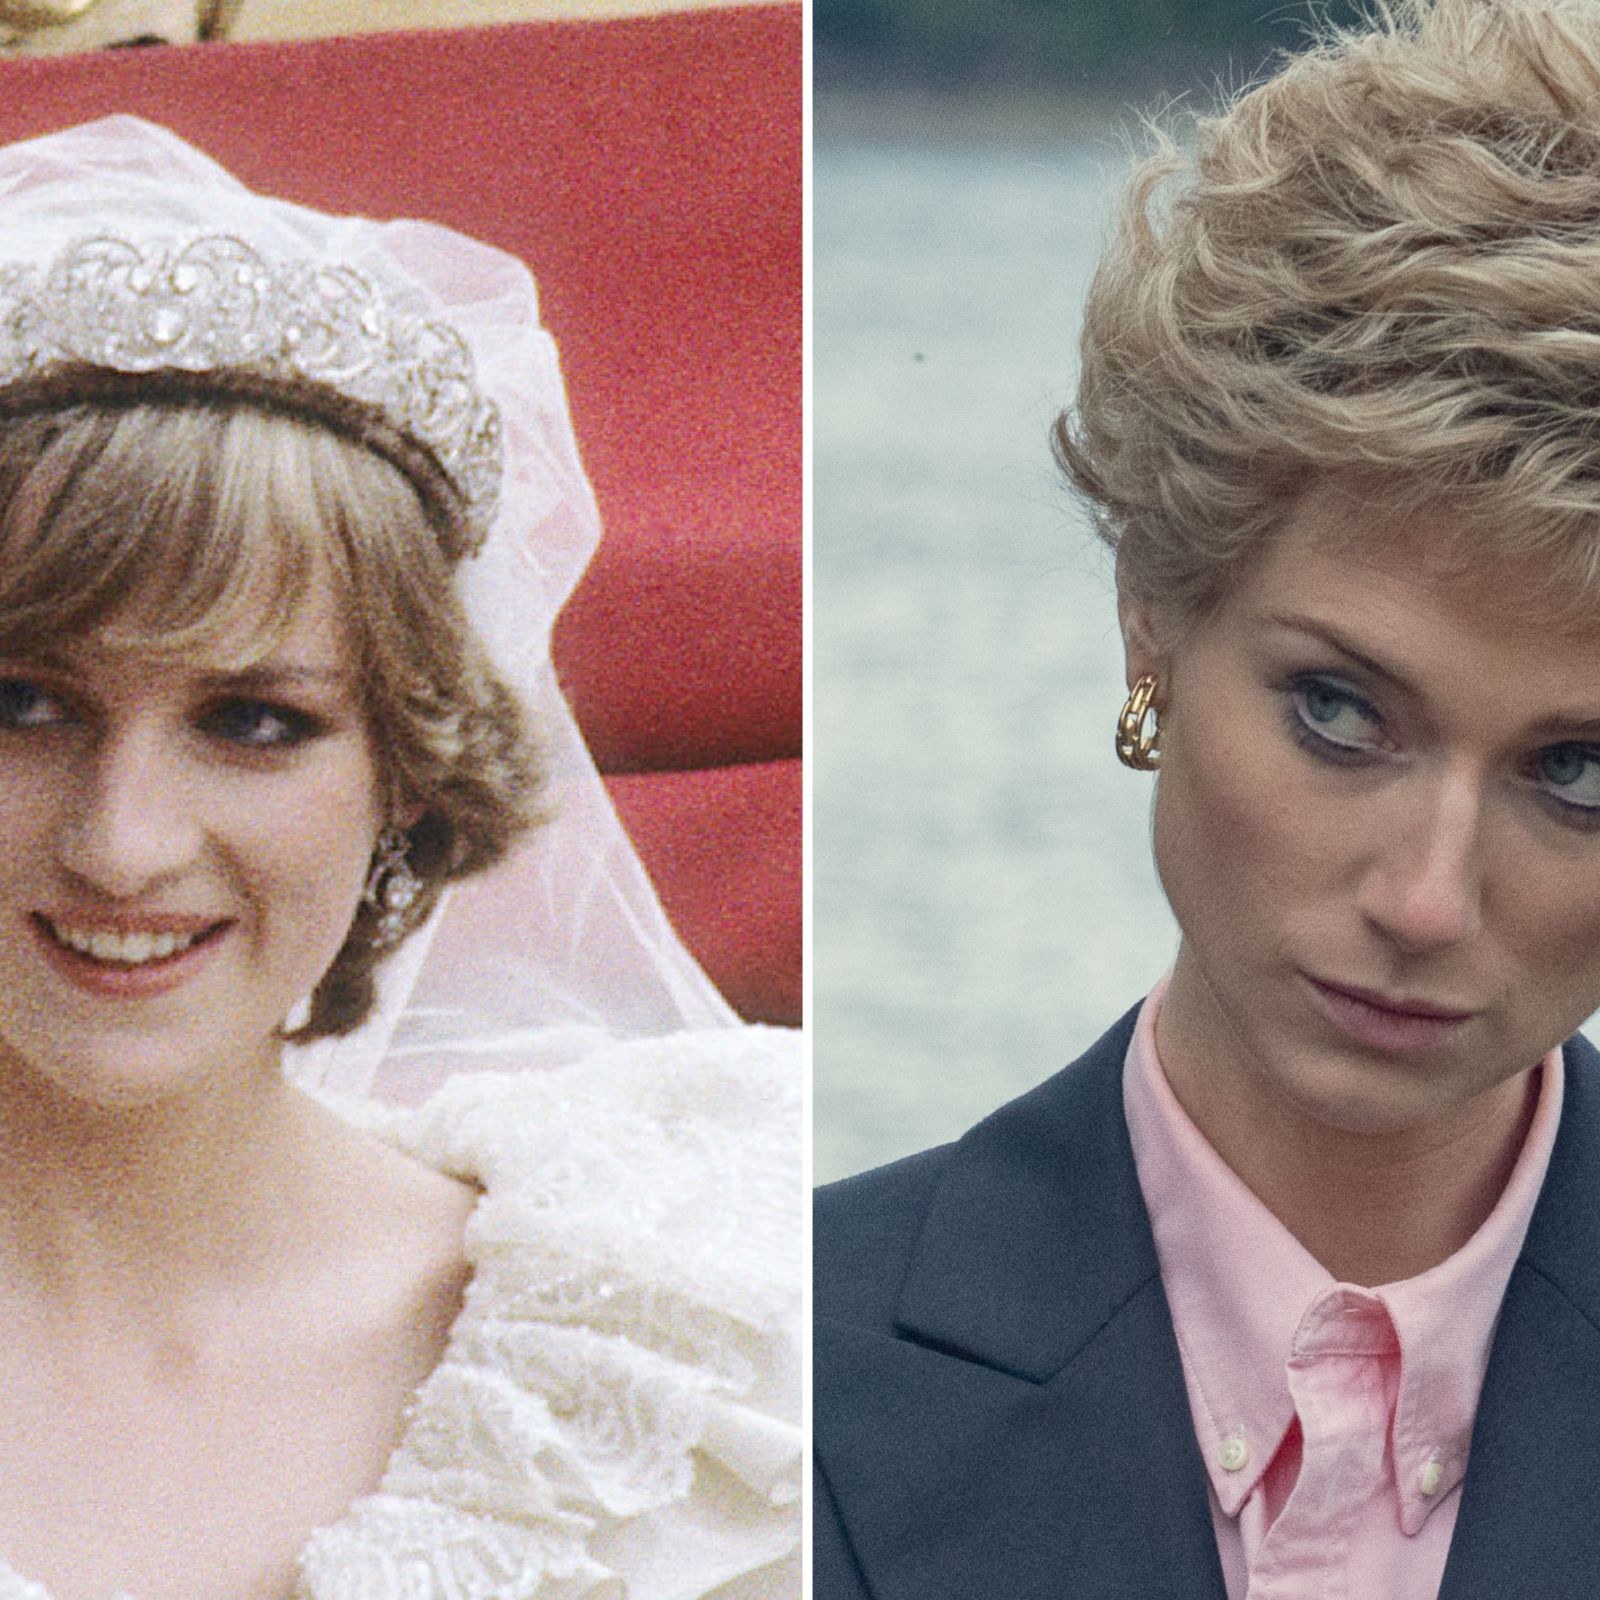 The Crown': Did Princess Diana Make Virginity Vow Before Marrying